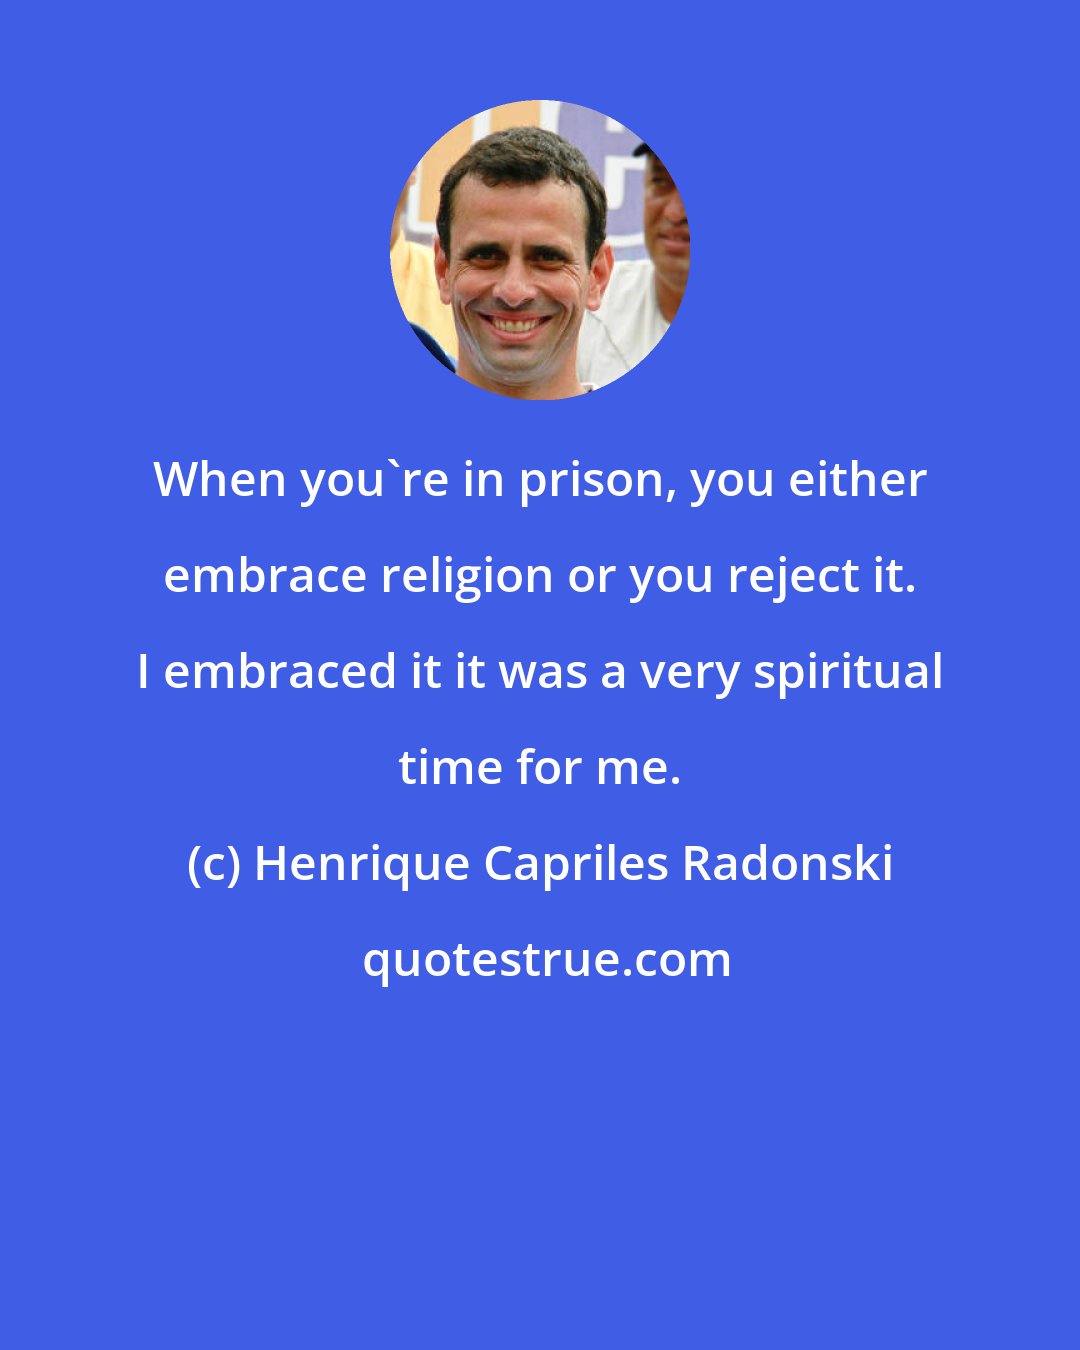 Henrique Capriles Radonski: When you're in prison, you either embrace religion or you reject it. I embraced it it was a very spiritual time for me.